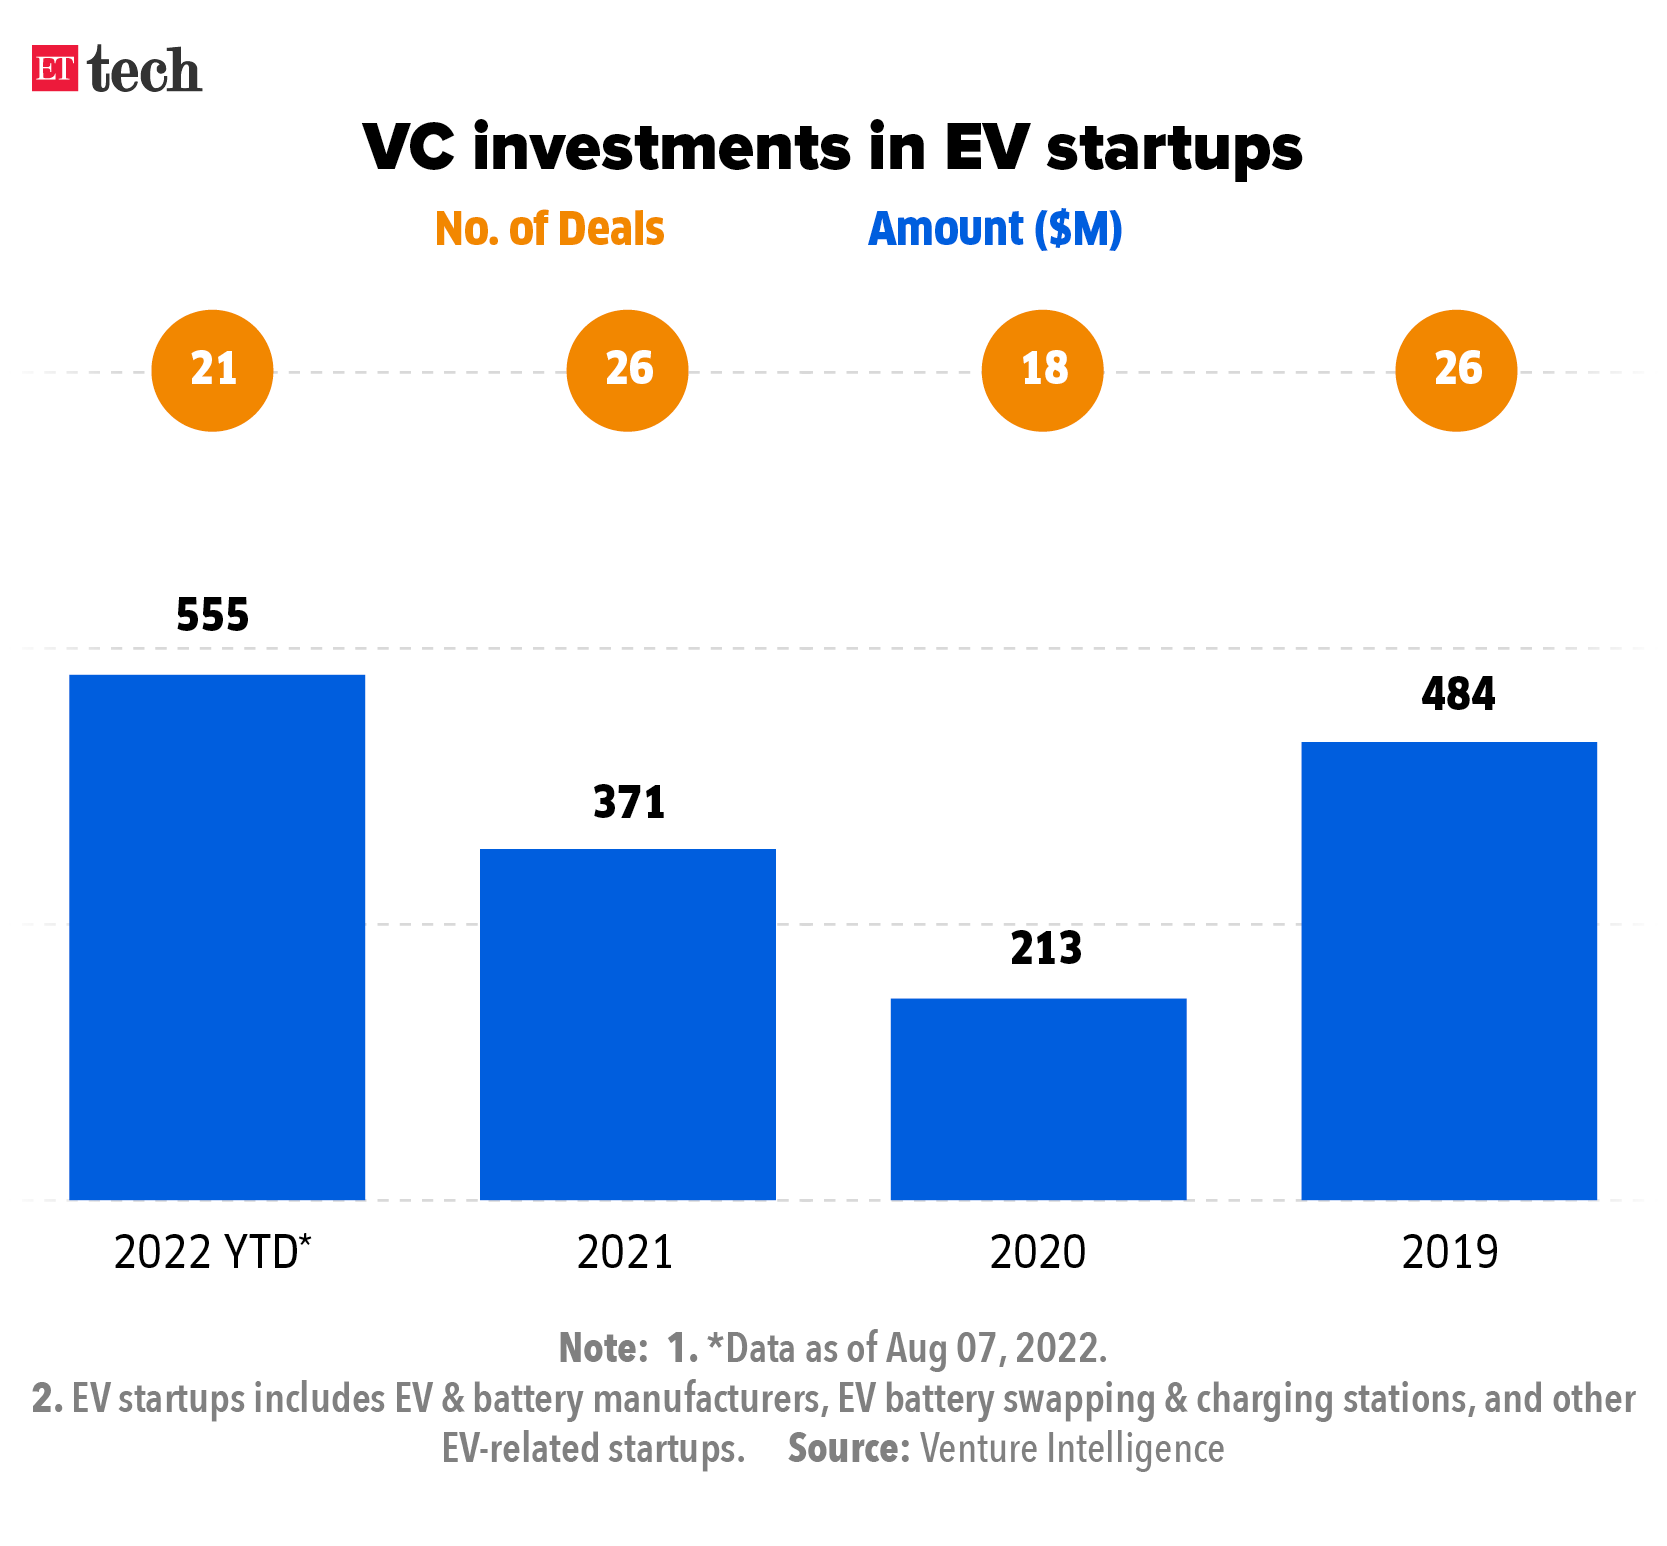 VC investments in startups EV_Graphic_ETTECH